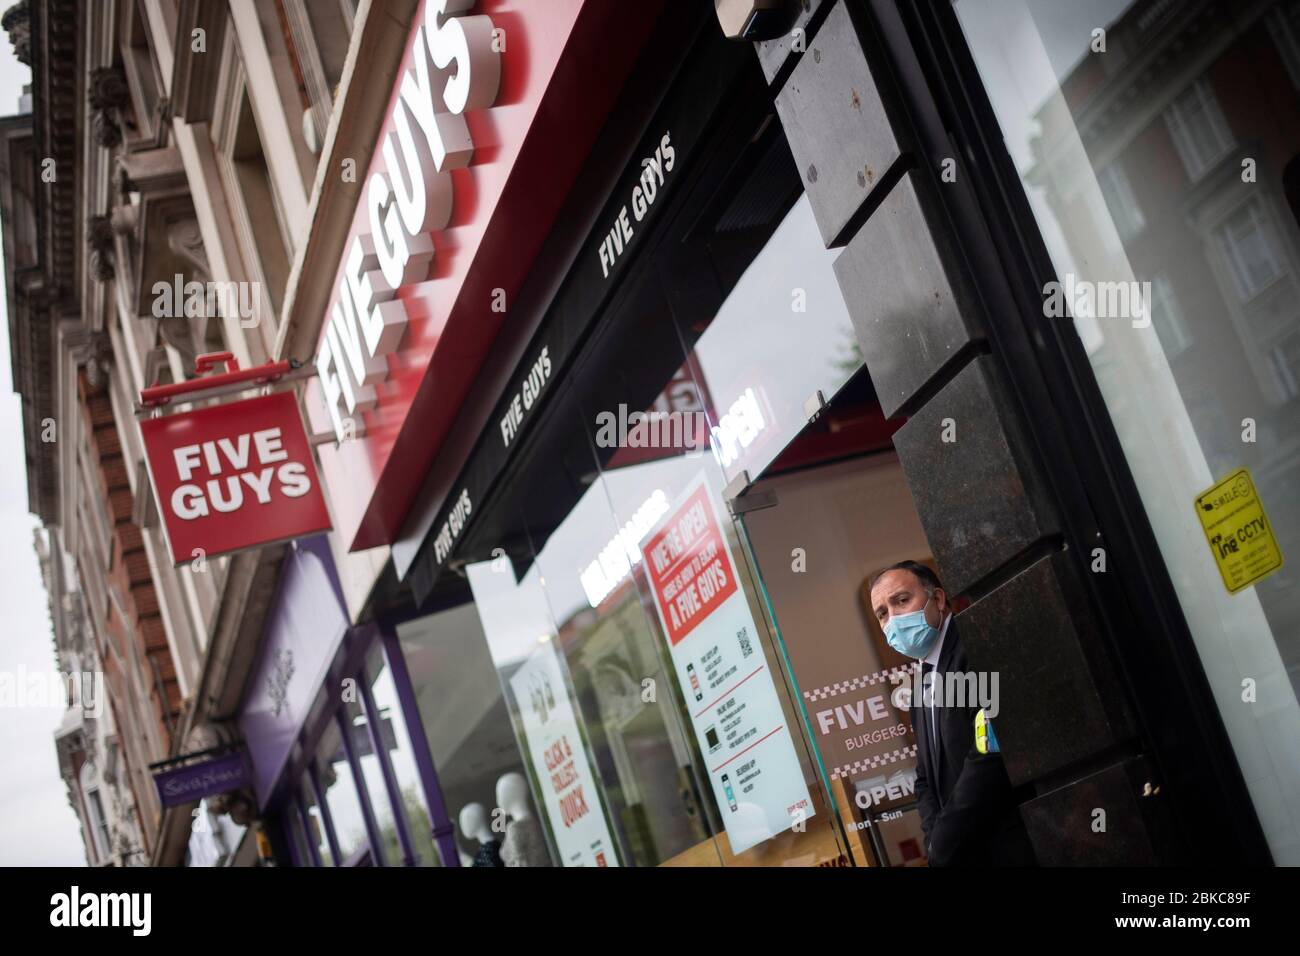 A security man on the door of Five Guys restaurant in Kensington, London, after the burger chain reopened eight of their sites, as the UK continues in lockdown to help curb the spread of the coronavirus. Stock Photo